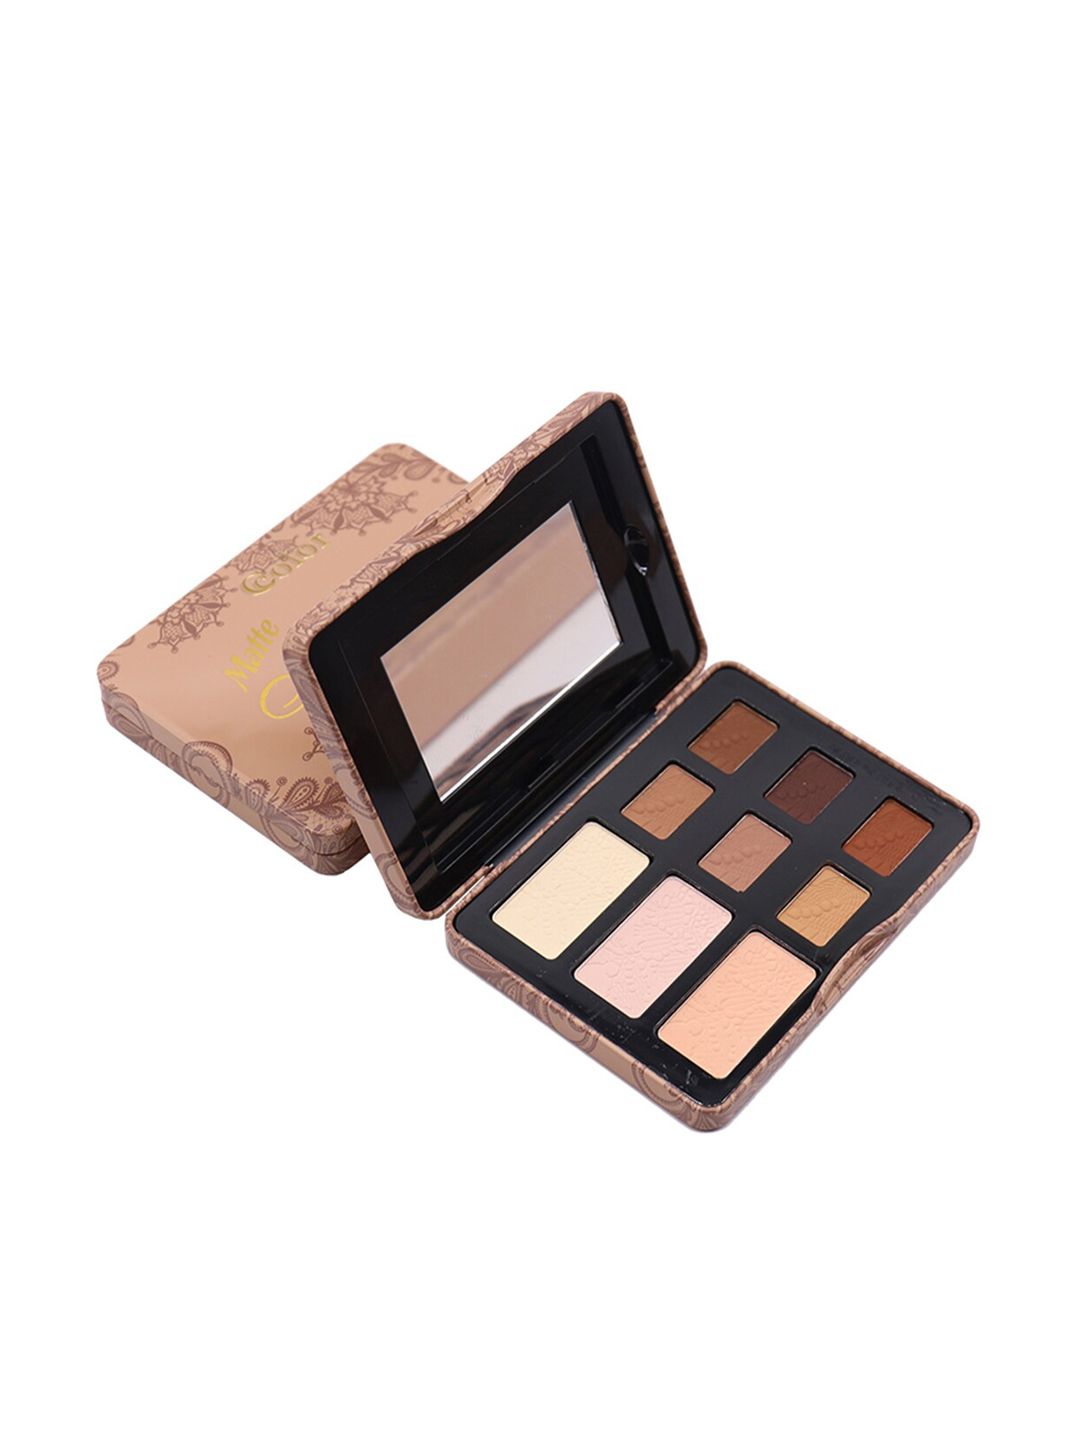 Okalan Matte Natural 9 Color Eyeshadow Palette 15 gm Price in India